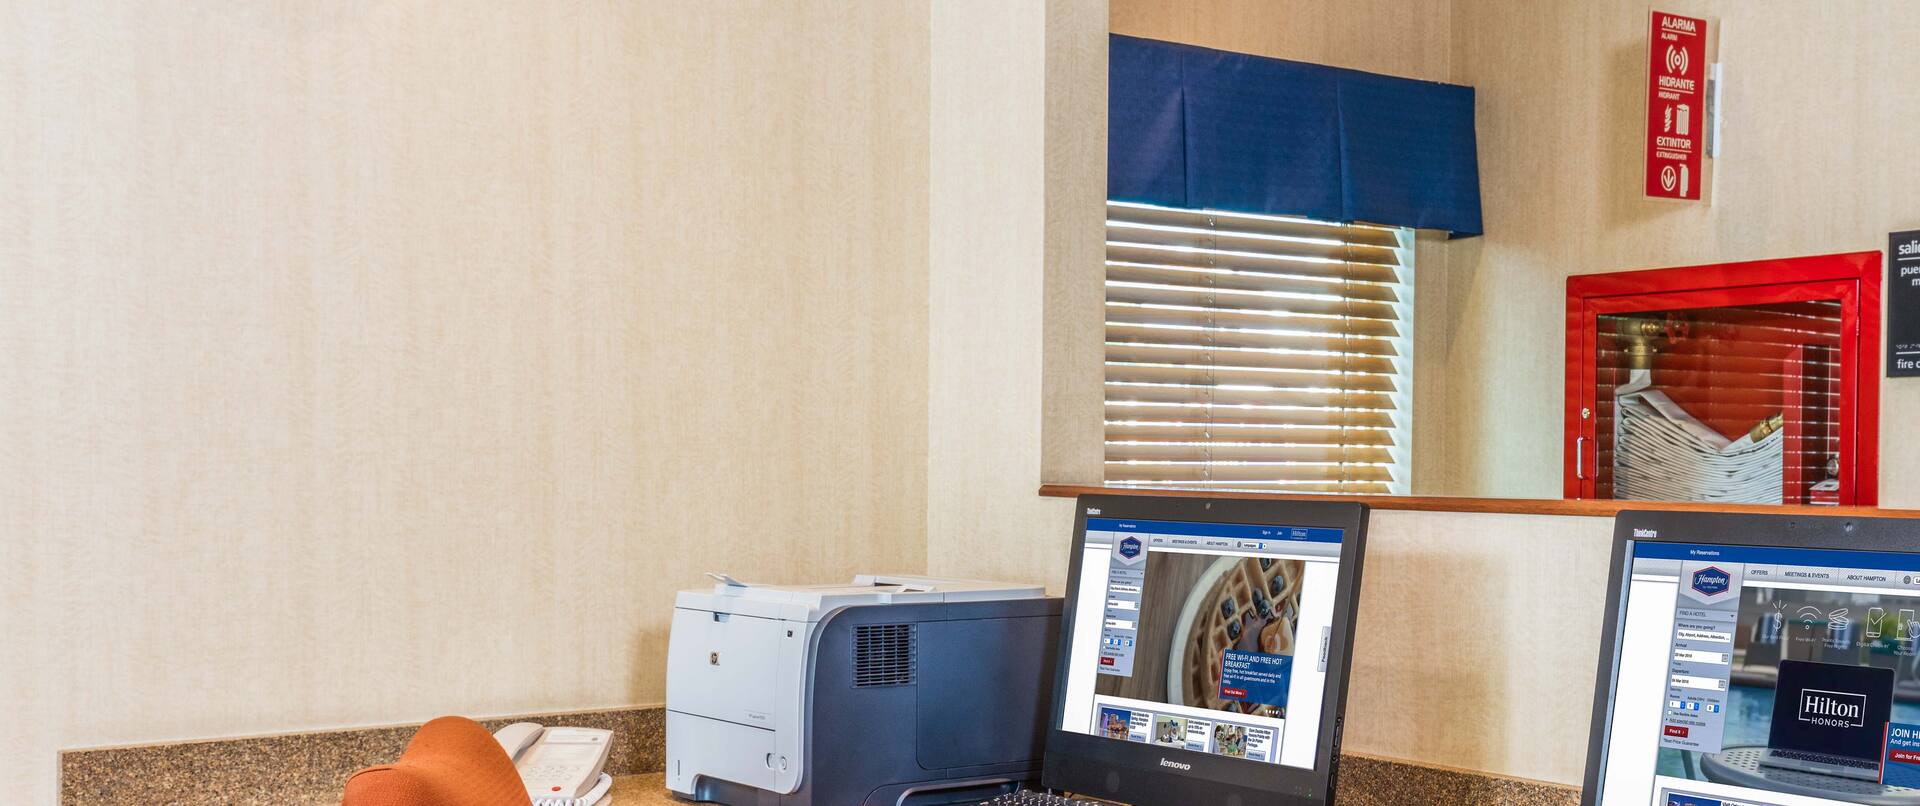 Computers and Printer for Guest Use